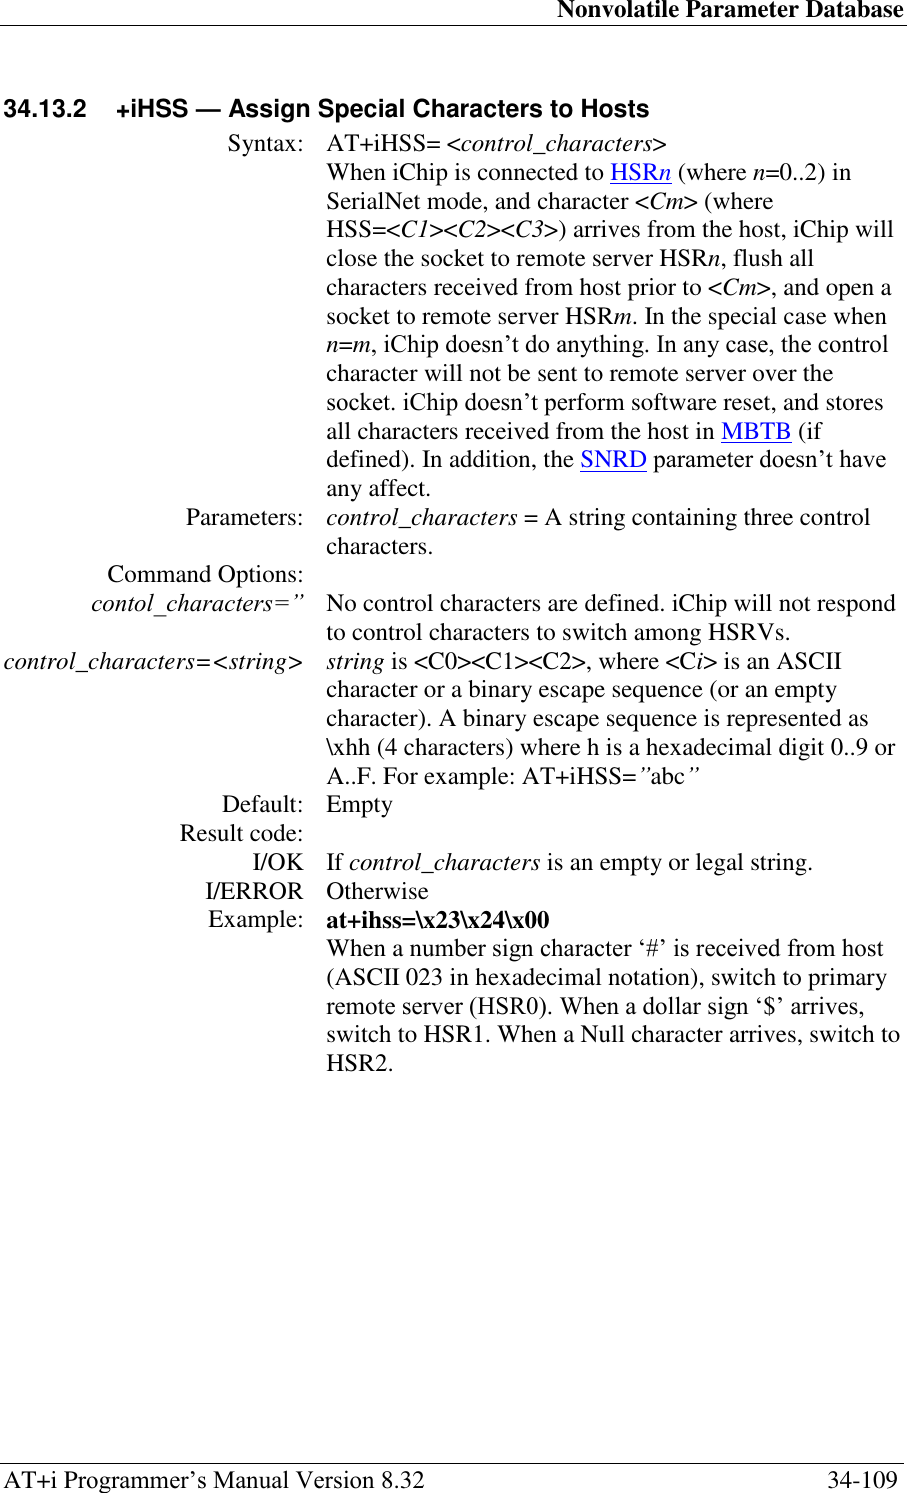 Nonvolatile Parameter Database AT+i Programmer‘s Manual Version 8.32  34-109 34.13.2  +iHSS — Assign Special Characters to Hosts  Syntax: AT+iHSS= &lt;control_characters&gt;  When iChip is connected to HSRn (where n=0..2) in SerialNet mode, and character &lt;Cm&gt; (where HSS=&lt;C1&gt;&lt;C2&gt;&lt;C3&gt;) arrives from the host, iChip will close the socket to remote server HSRn, flush all characters received from host prior to &lt;Cm&gt;, and open a socket to remote server HSRm. In the special case when n=m, iChip doesn‘t do anything. In any case, the control character will not be sent to remote server over the socket. iChip doesn‘t perform software reset, and stores all characters received from the host in MBTB (if defined). In addition, the SNRD parameter doesn‘t have any affect. Parameters: control_characters = A string containing three control characters.  Command Options:  contol_characters=” No control characters are defined. iChip will not respond to control characters to switch among HSRVs. control_characters=&lt;string&gt; string is &lt;C0&gt;&lt;C1&gt;&lt;C2&gt;, where &lt;Ci&gt; is an ASCII character or a binary escape sequence (or an empty character). A binary escape sequence is represented as \xhh (4 characters) where h is a hexadecimal digit 0..9 or A..F. For example: AT+iHSS=”abc” Default: Empty Result code:  I/OK If control_characters is an empty or legal string. I/ERROR Otherwise Example: at+ihss=\x23\x24\x00 When a number sign character ‗#‘ is received from host (ASCII 023 in hexadecimal notation), switch to primary remote server (HSR0). When a dollar sign ‗$‘ arrives, switch to HSR1. When a Null character arrives, switch to HSR2.  